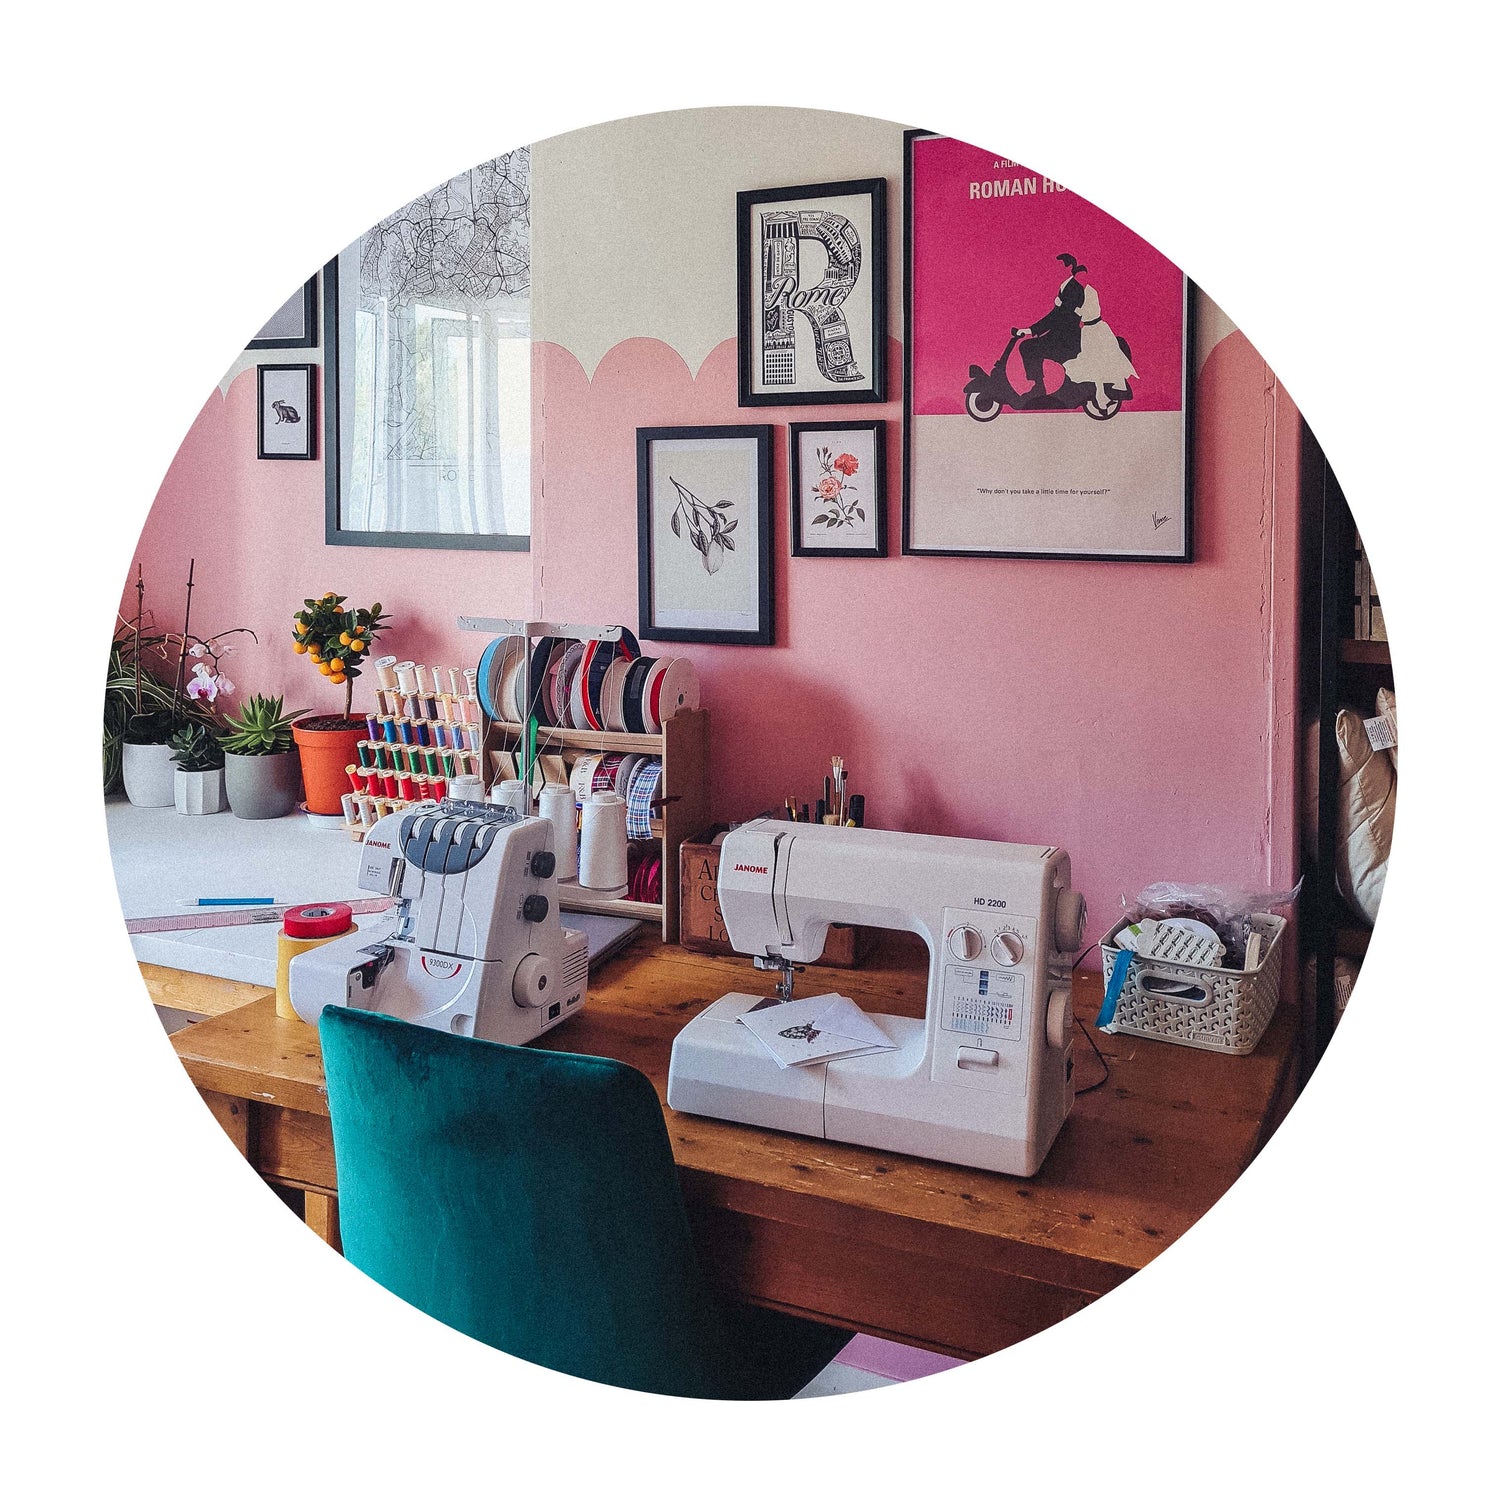 Behind the Scenes - F&B Crafts Sewing Room - Featuring pink scalloped walls, italian themed posters, janome machines and an emerald chair